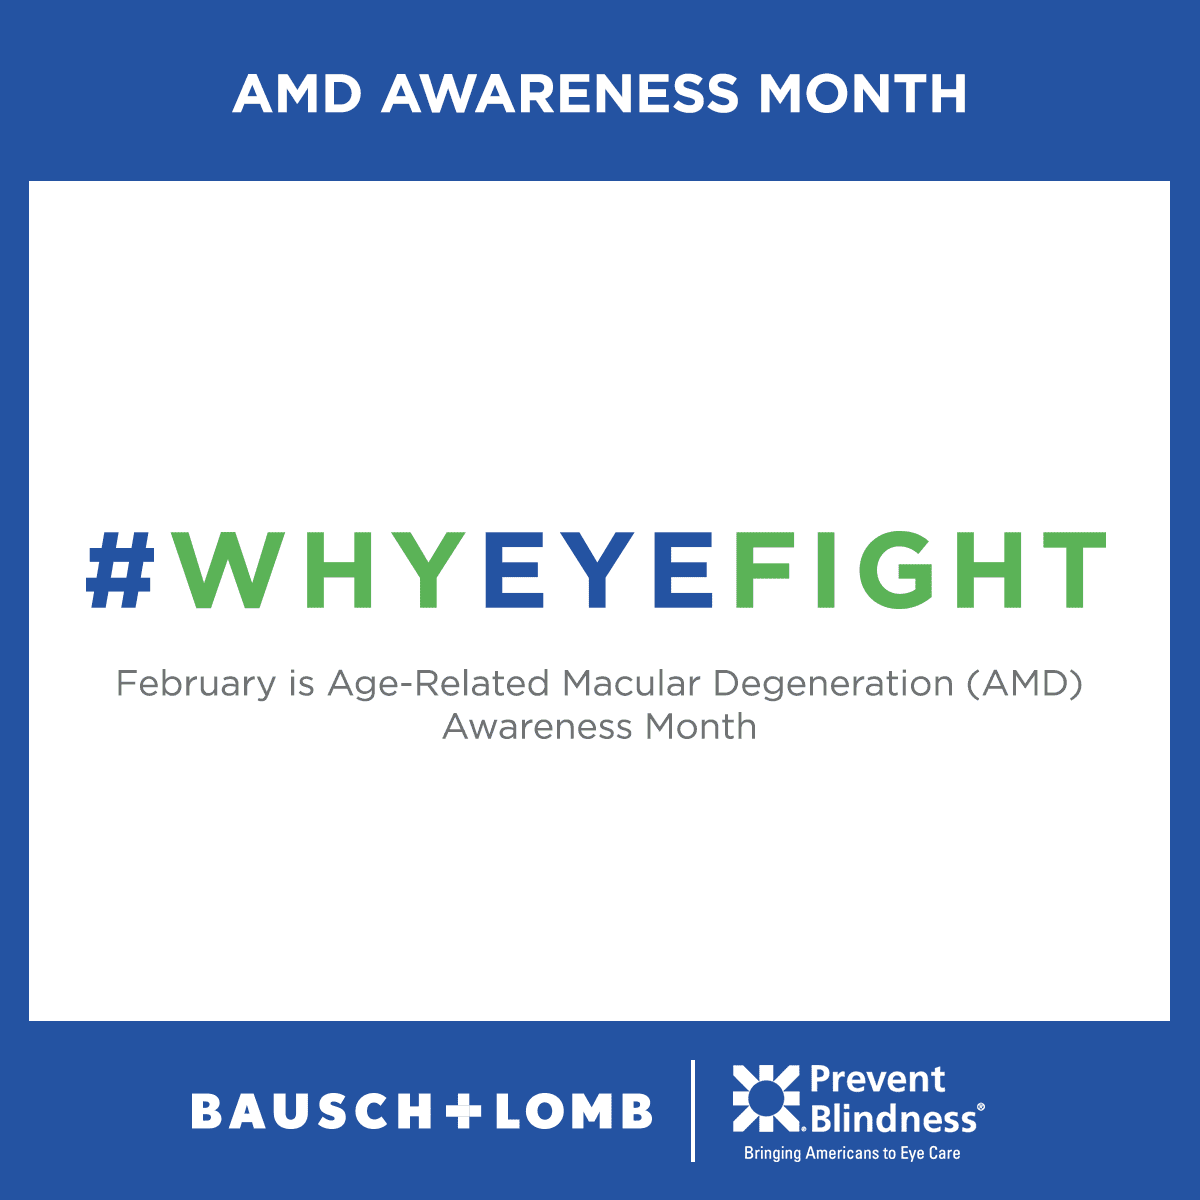 Why Eye Fight logo - AMD awareness month presented by prevent blindness